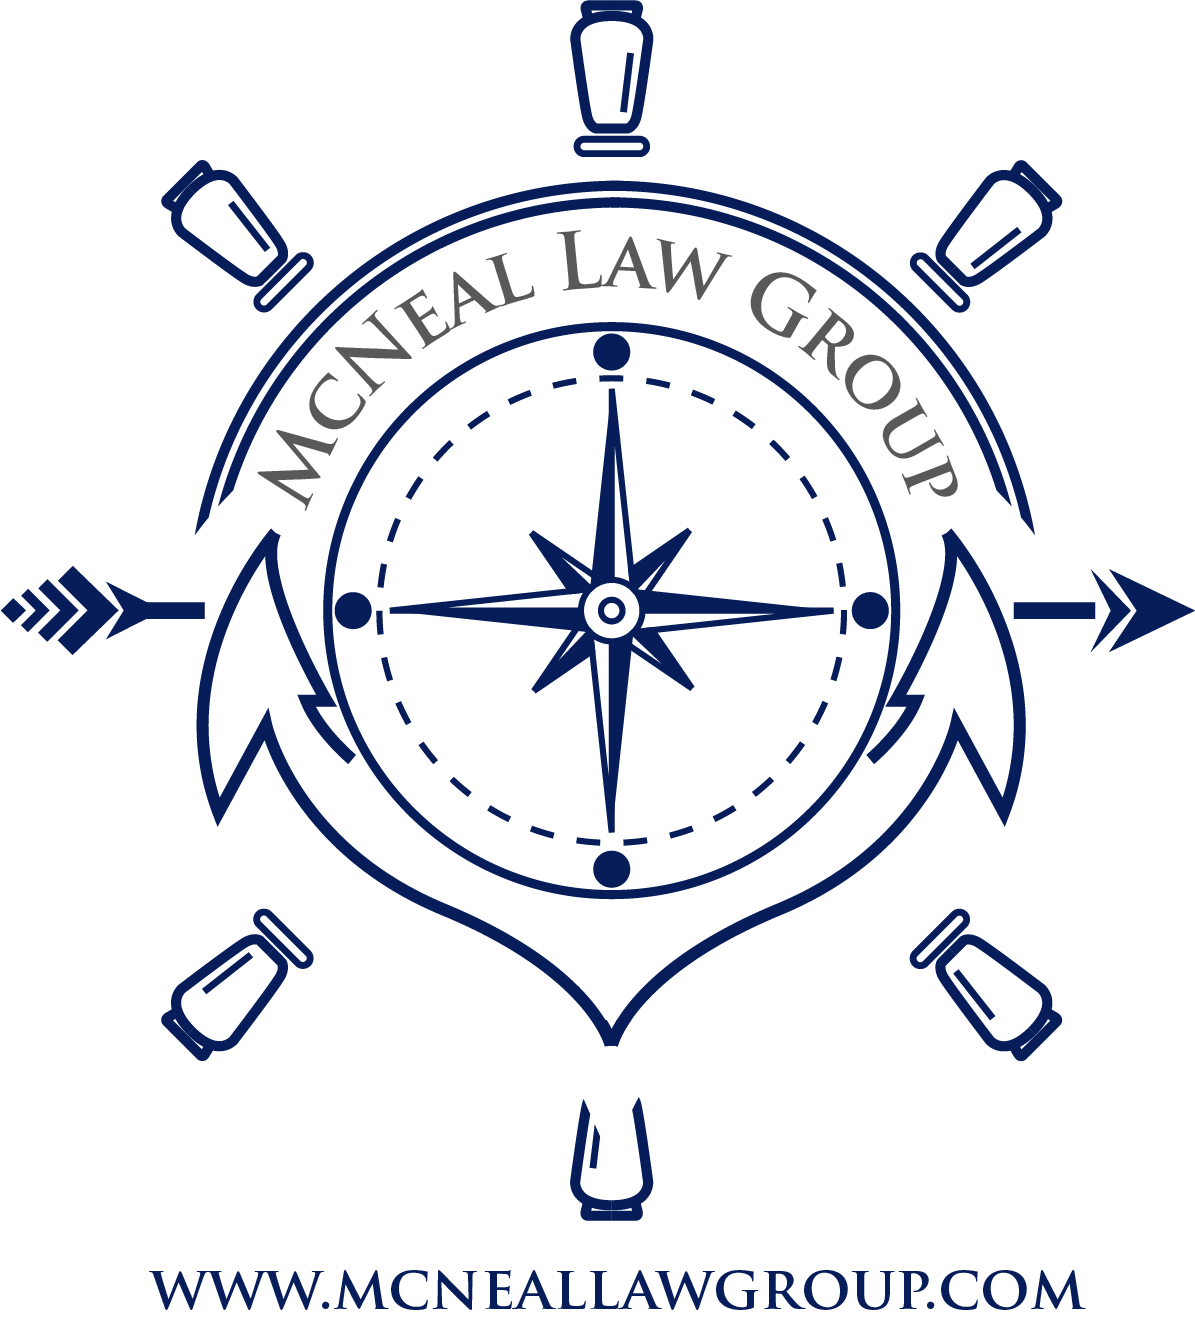 McNeal law firm, a personal injury law firm in Houston, TX that serves clients in personal injury cases